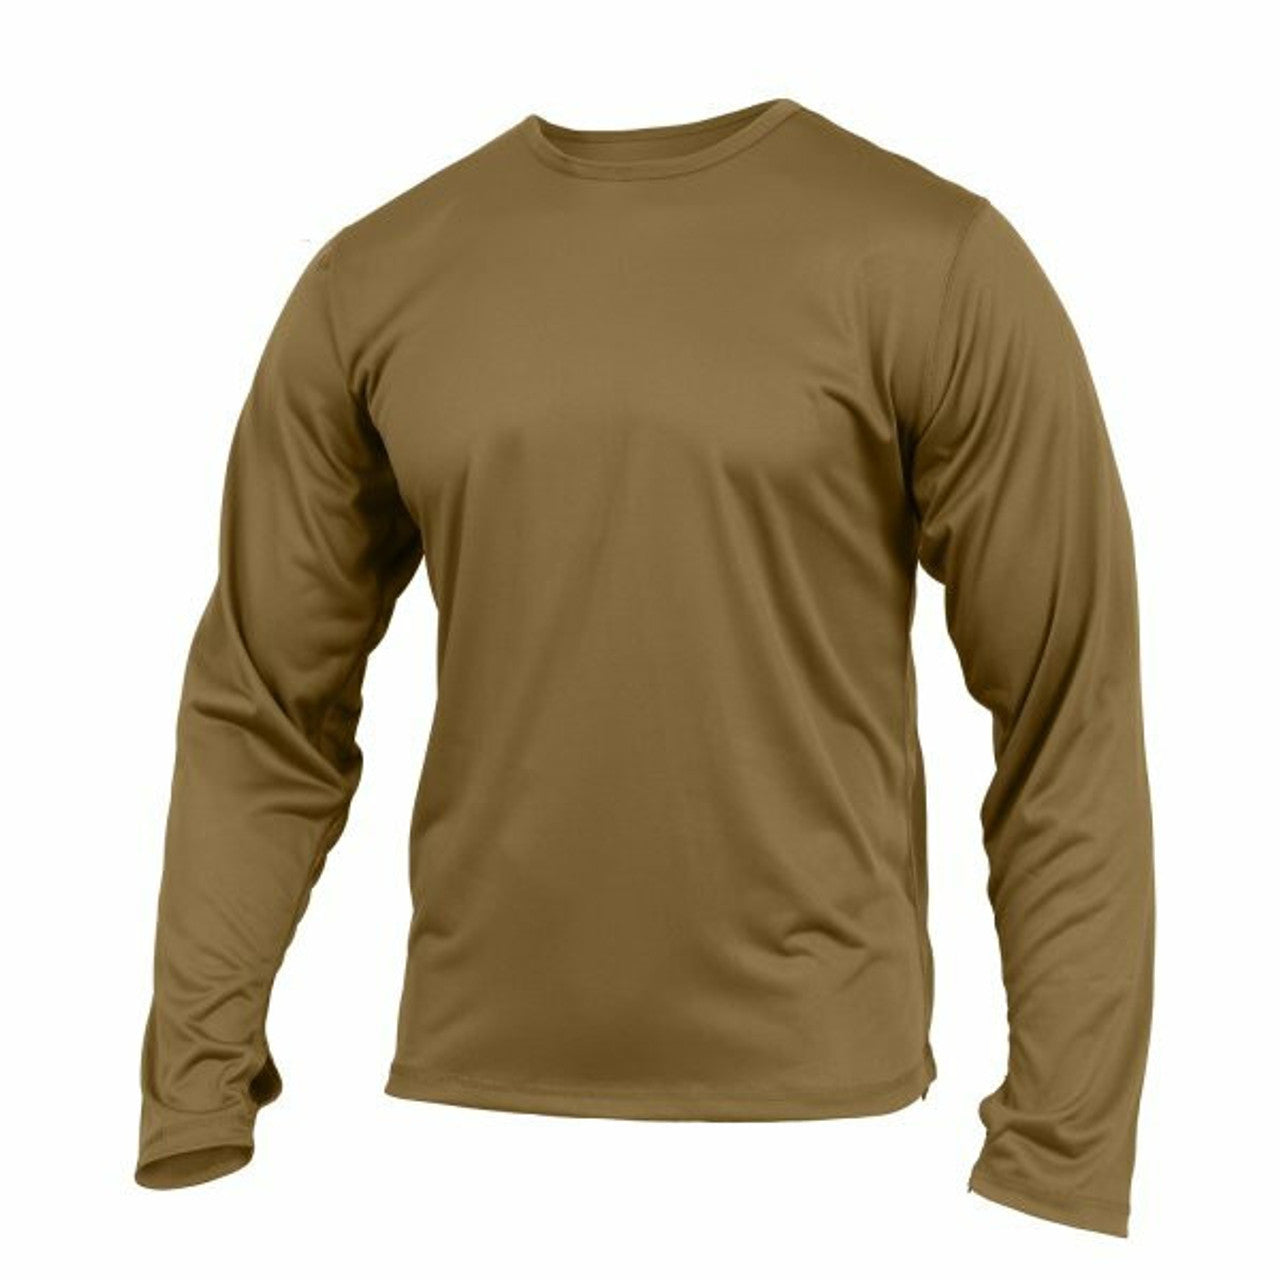 USED PolarTec Silky Thermal Tops & Bottoms